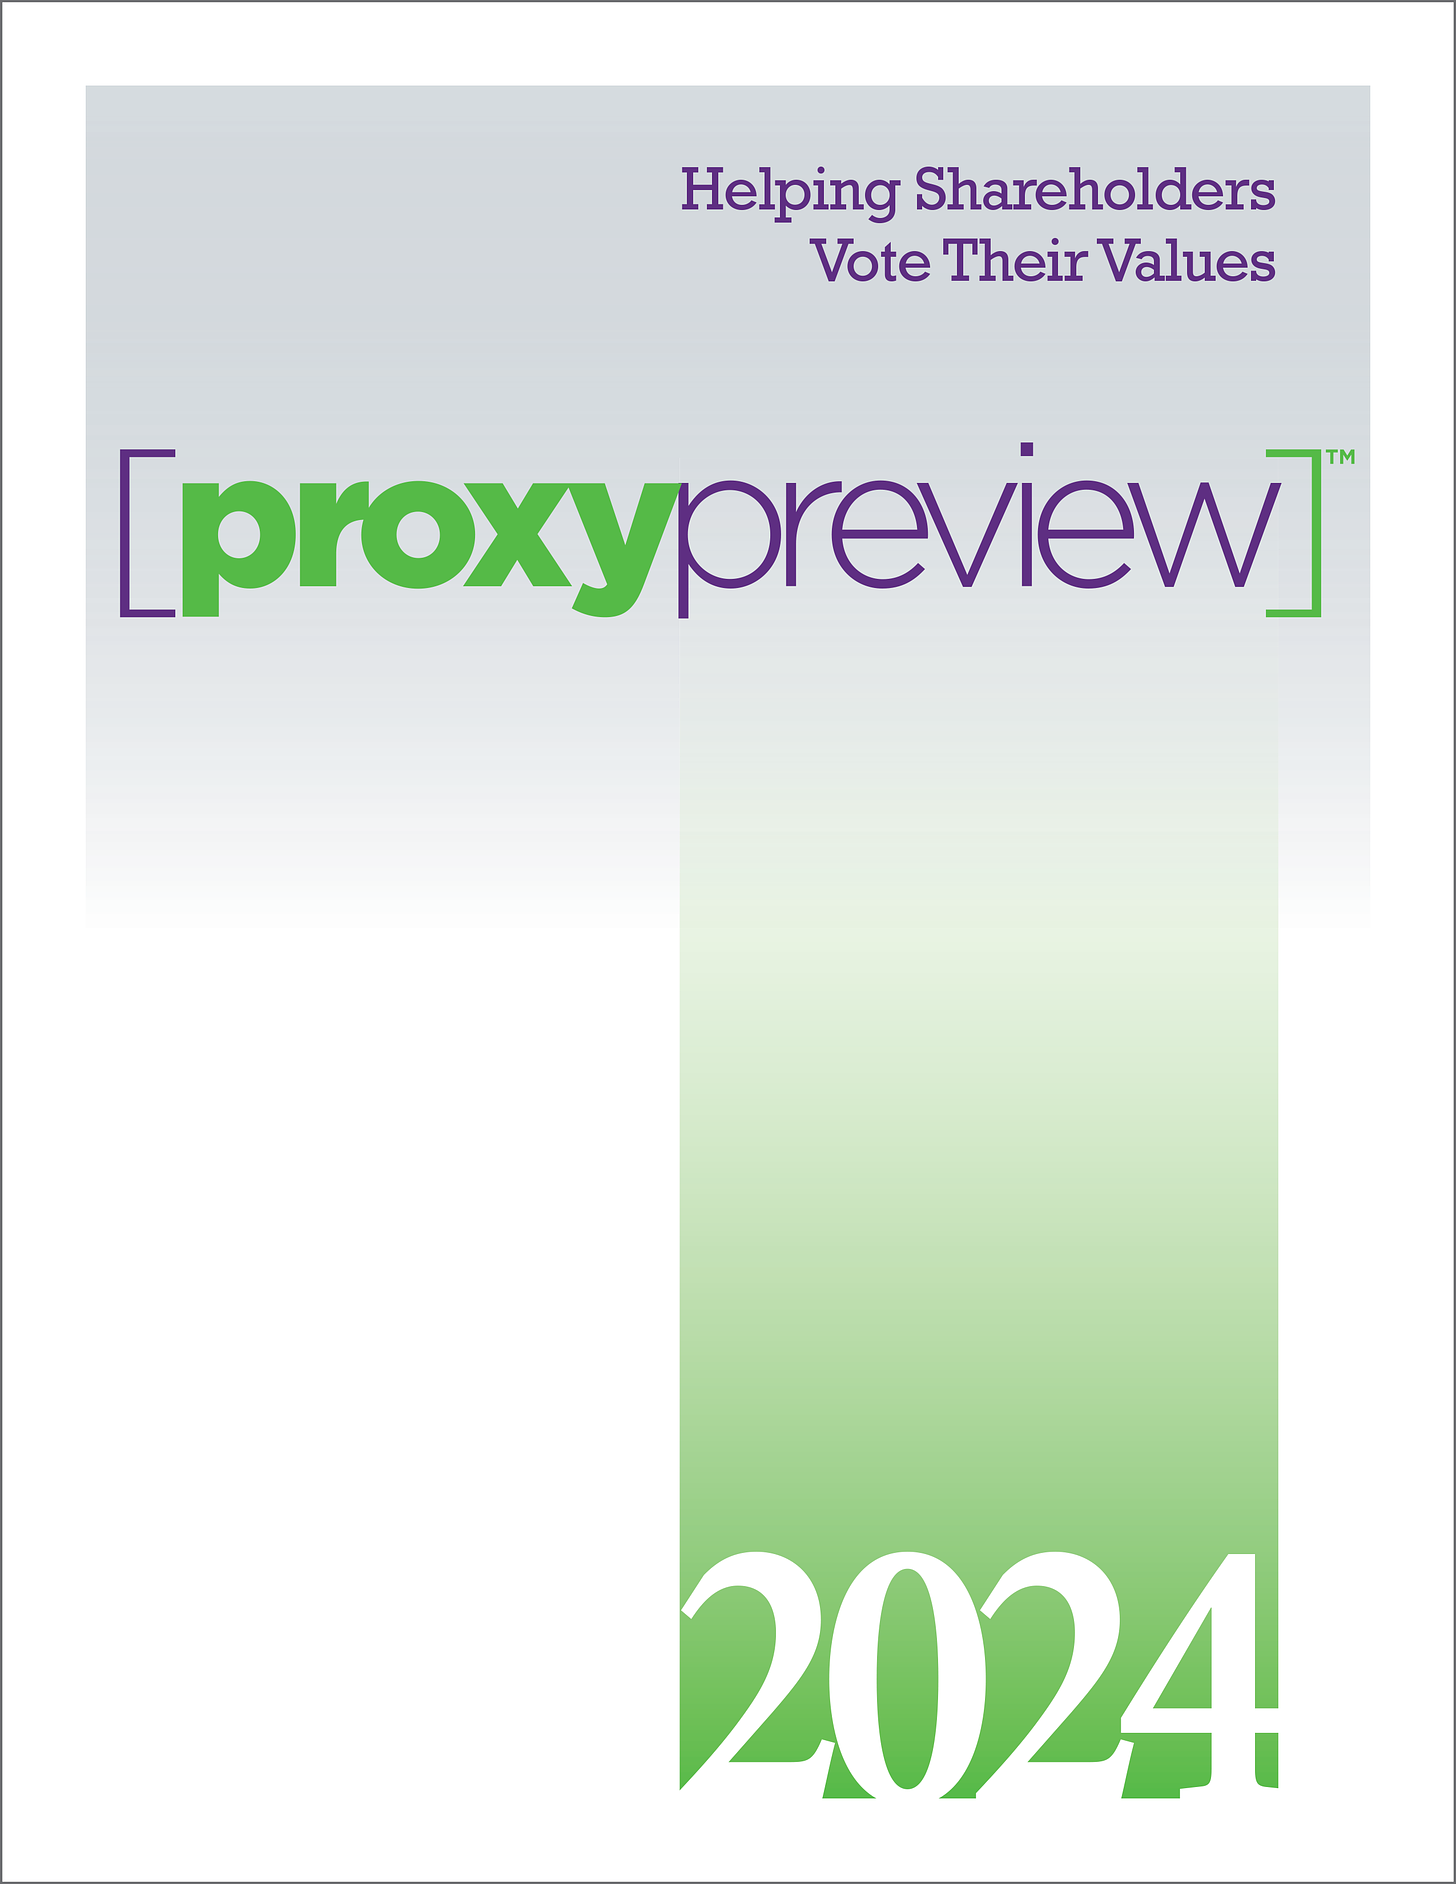 2023 Proxy Preview Report Cover: "Helping Shareholders Vote Their Values"